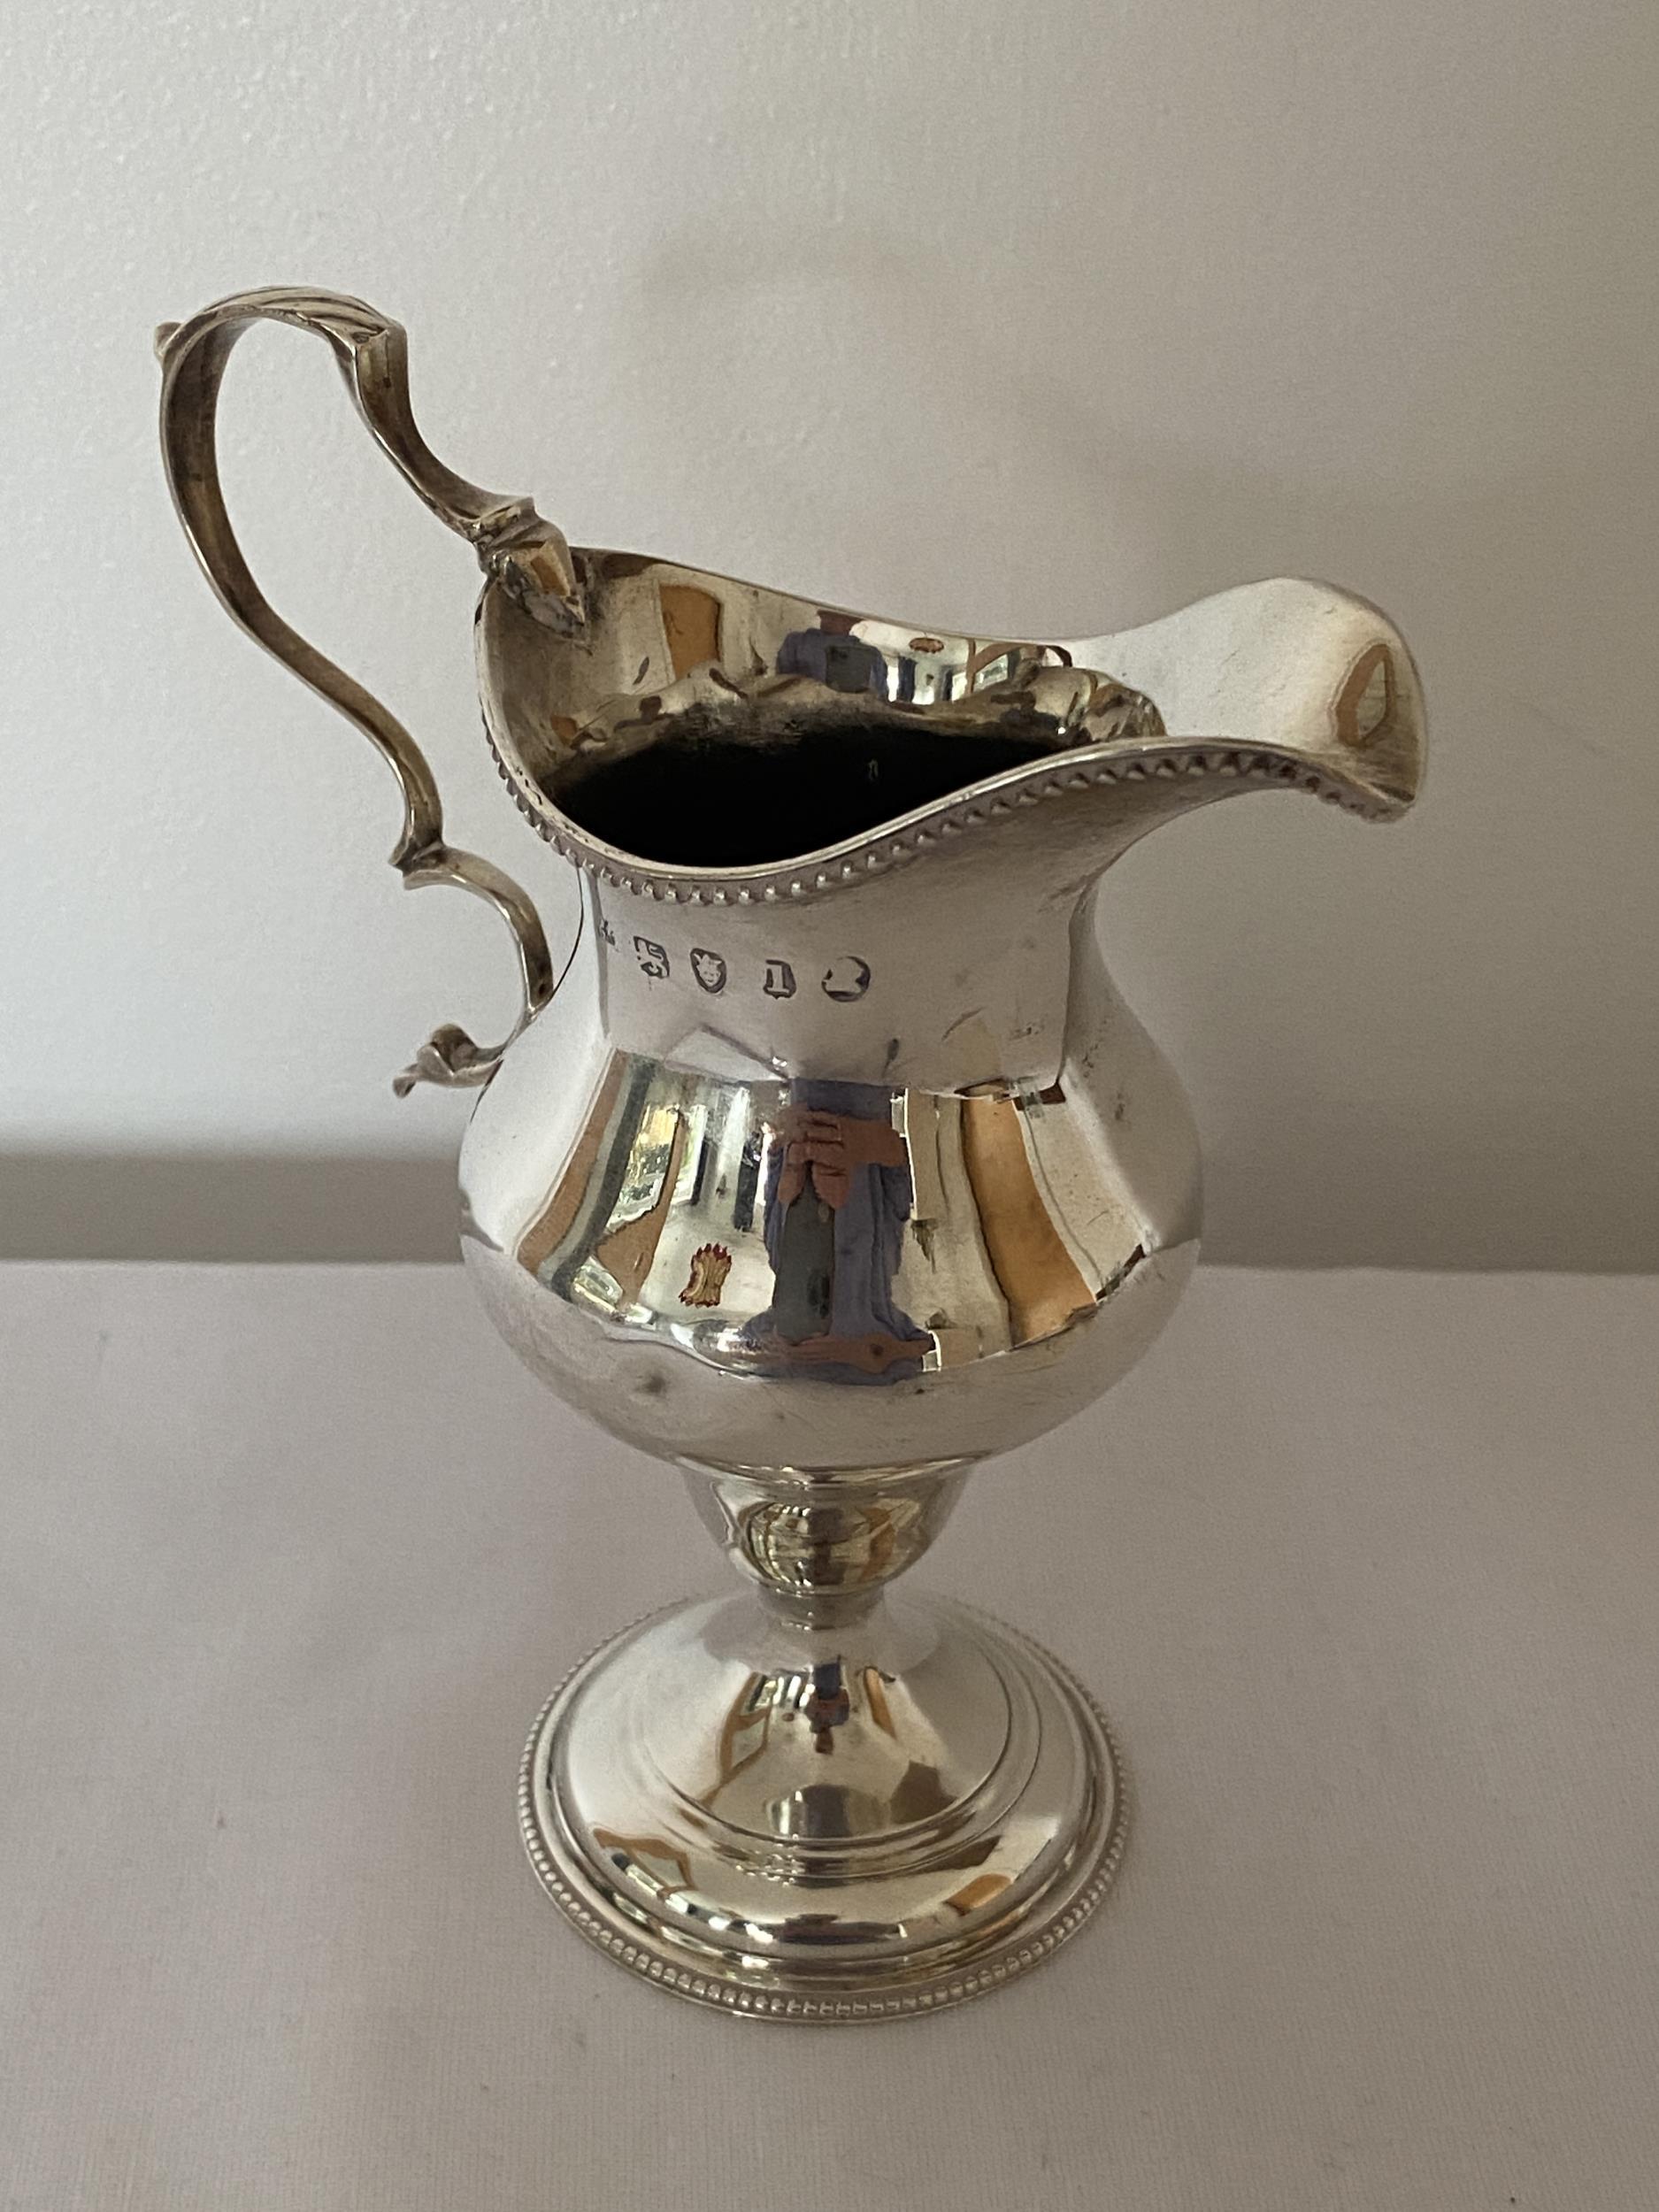 A GEORGE III 1786 HALLMARKED LONDON SILVER CREAM JUG, MAKER POSSIBLY G.W, 13CM TALL, GROSS WEIGHT 92 - Image 6 of 15